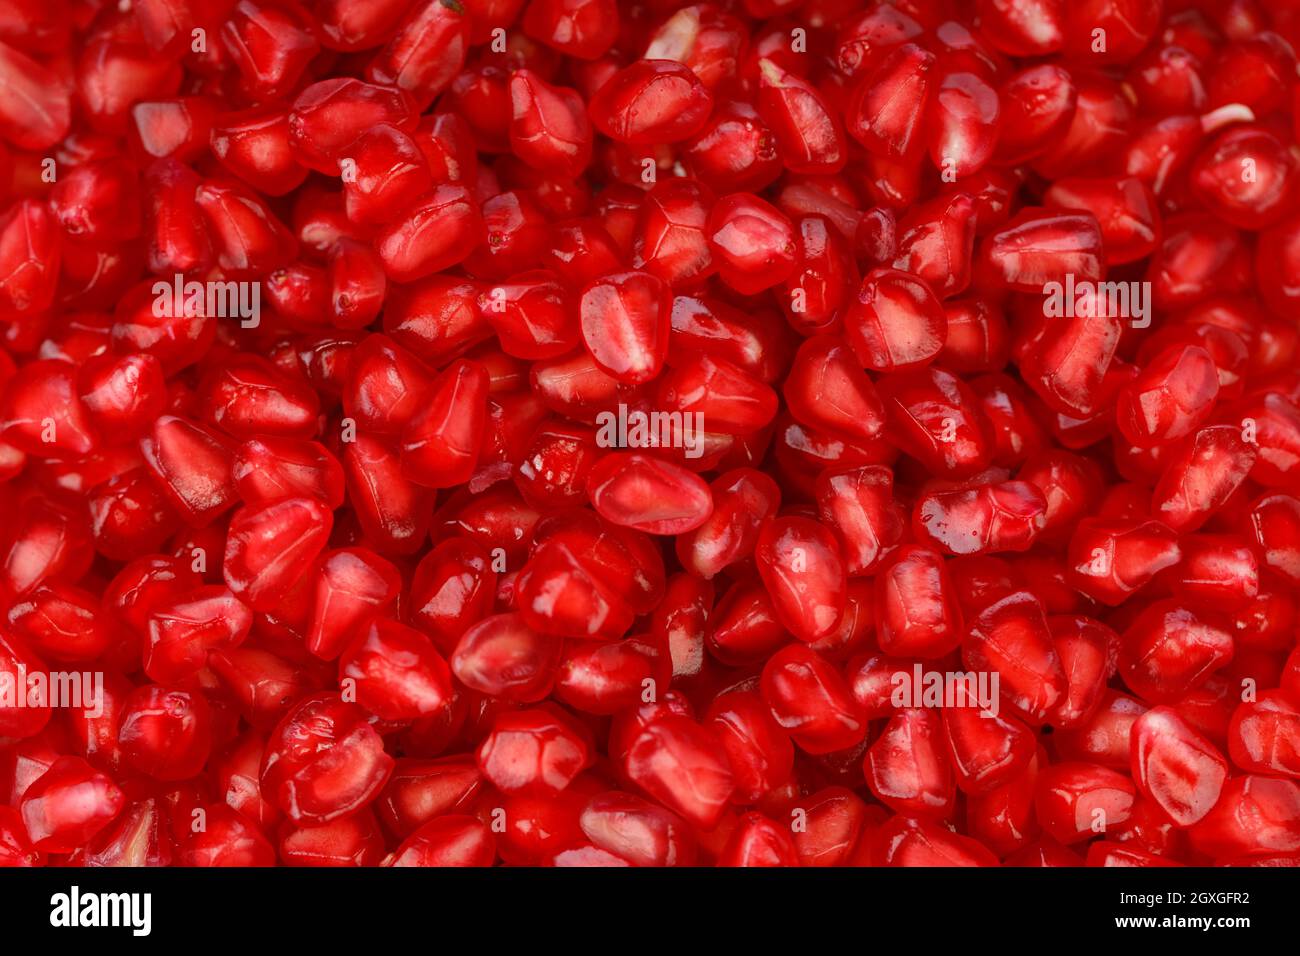 Fresh Pomegranate seed arranged in a square glass container with white background, isolated, close up. Stock Photo